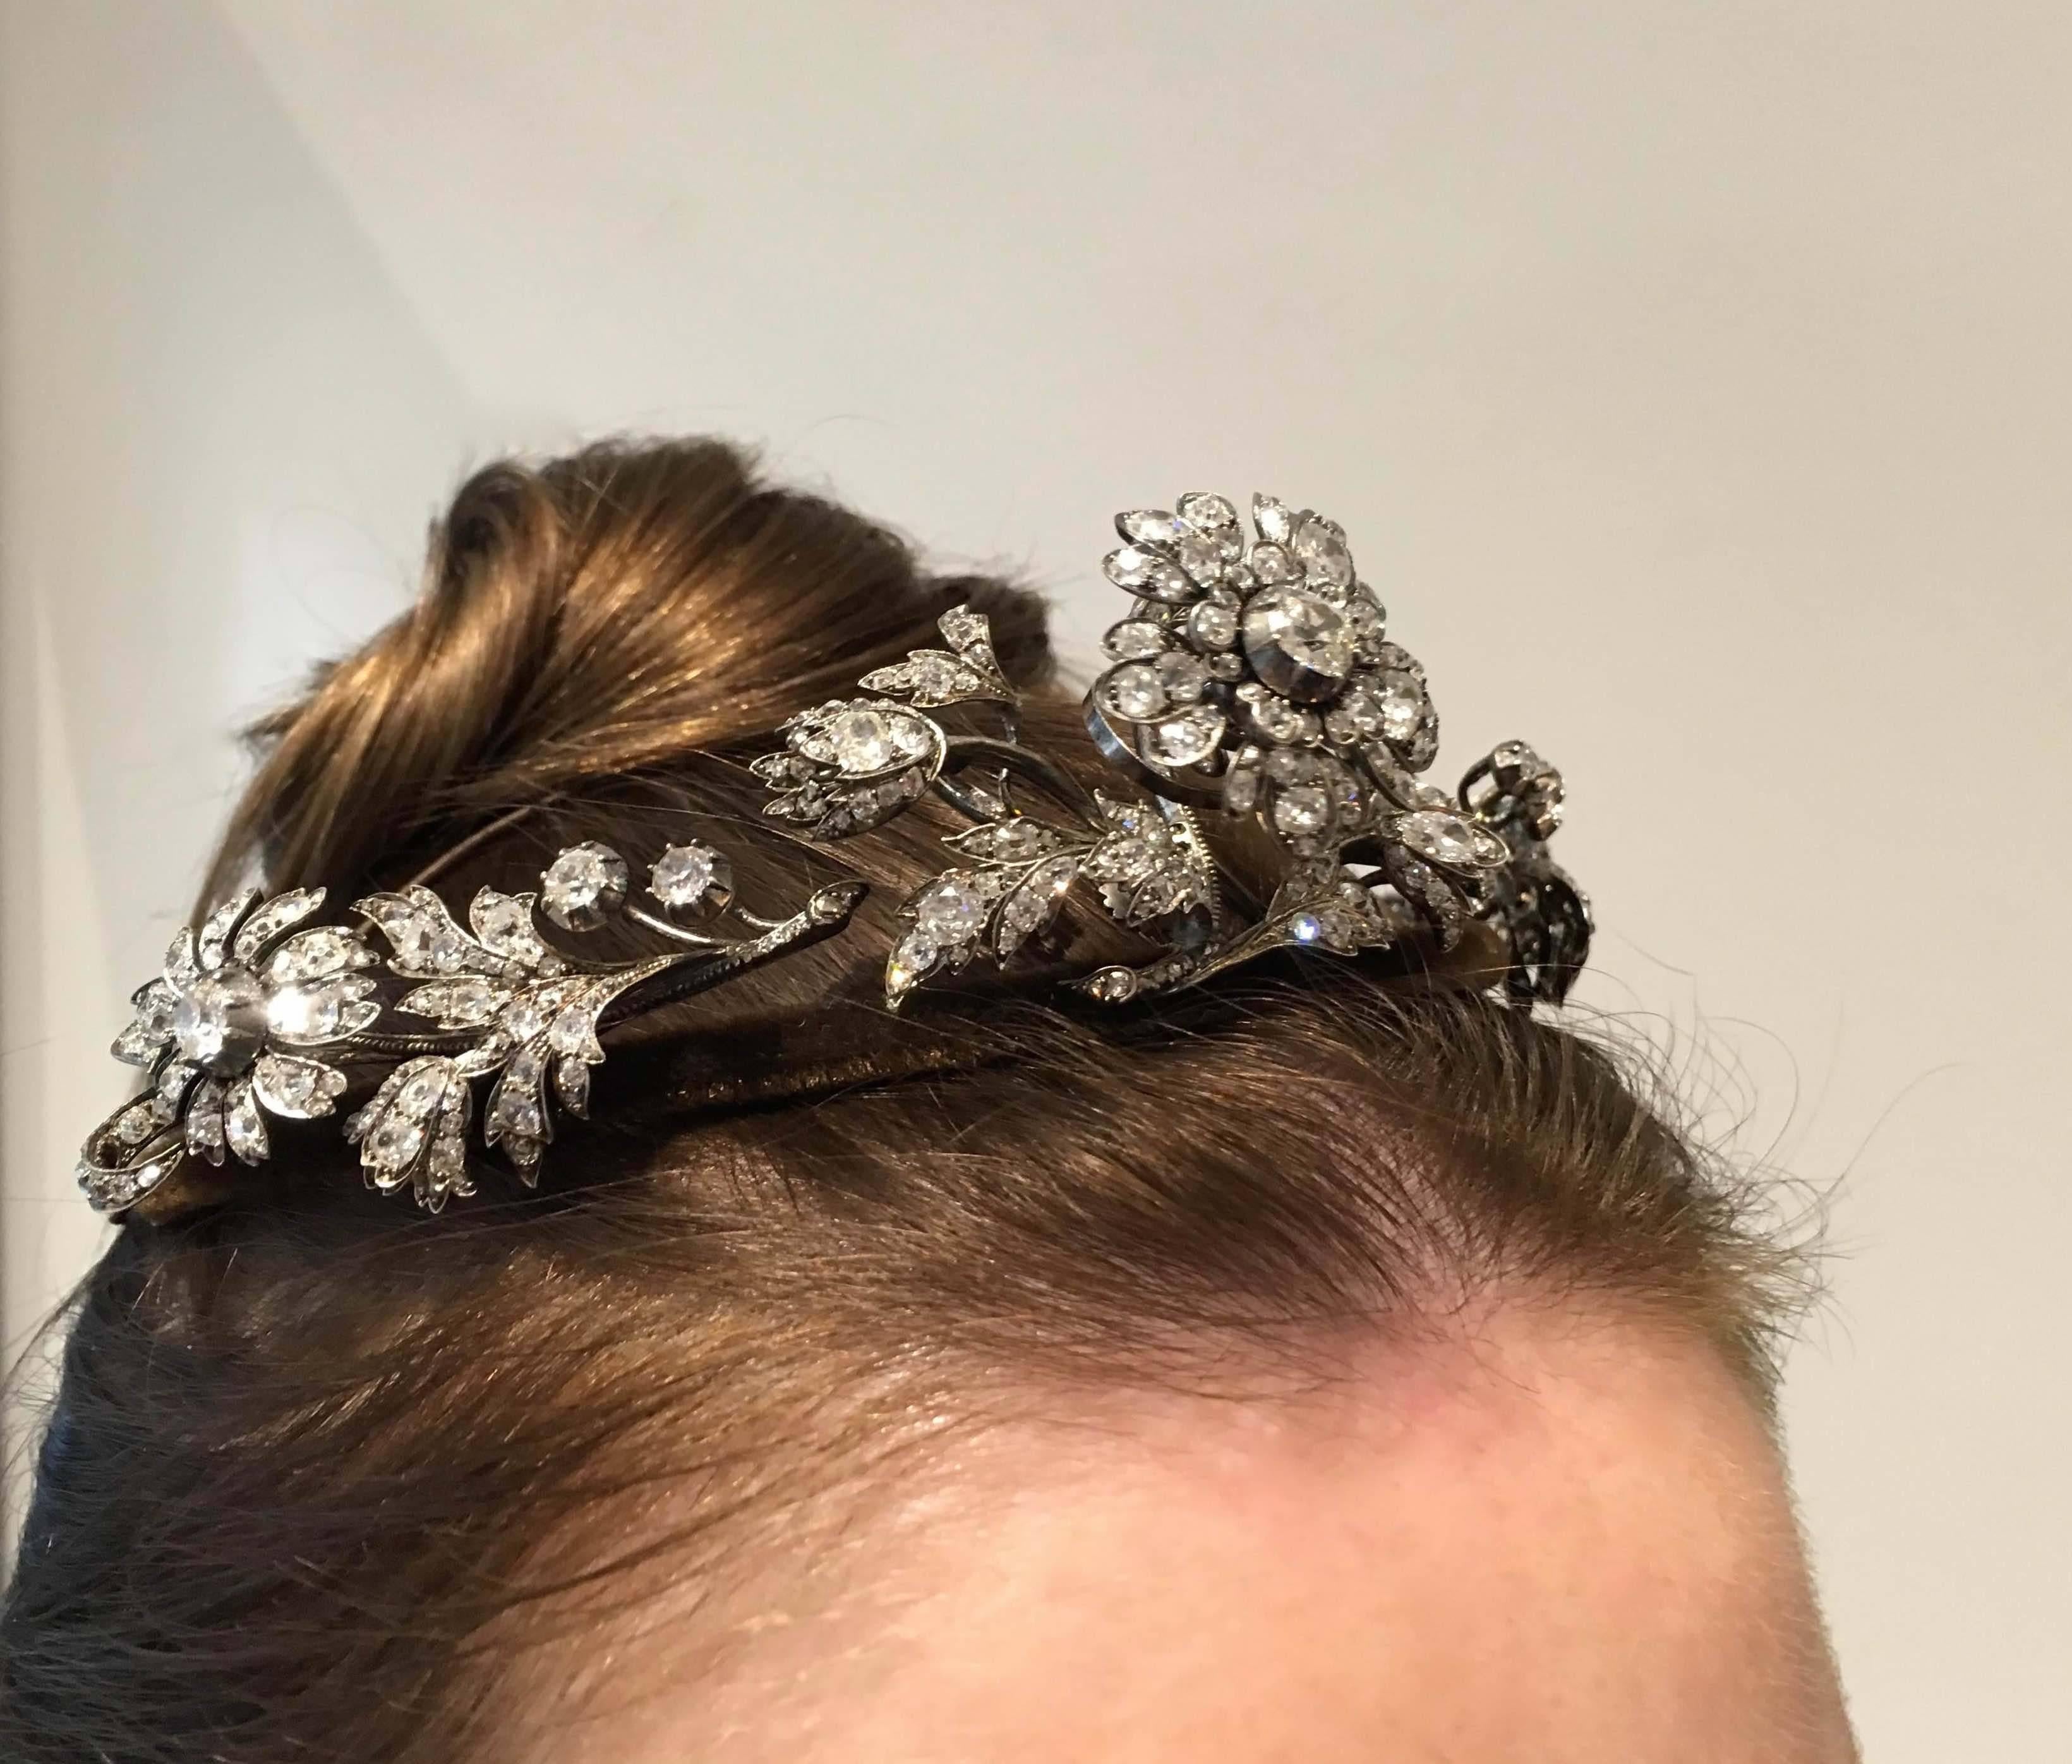 Diamond Tiara designed as a floral spray, the central flower en tremblant, with circular-cut, cushion-, pear-shaped, oval and rose diamonds, detachable tiara frame, three brooch clip fittings.
Mounted in silver and backed in gold. Frame covered with